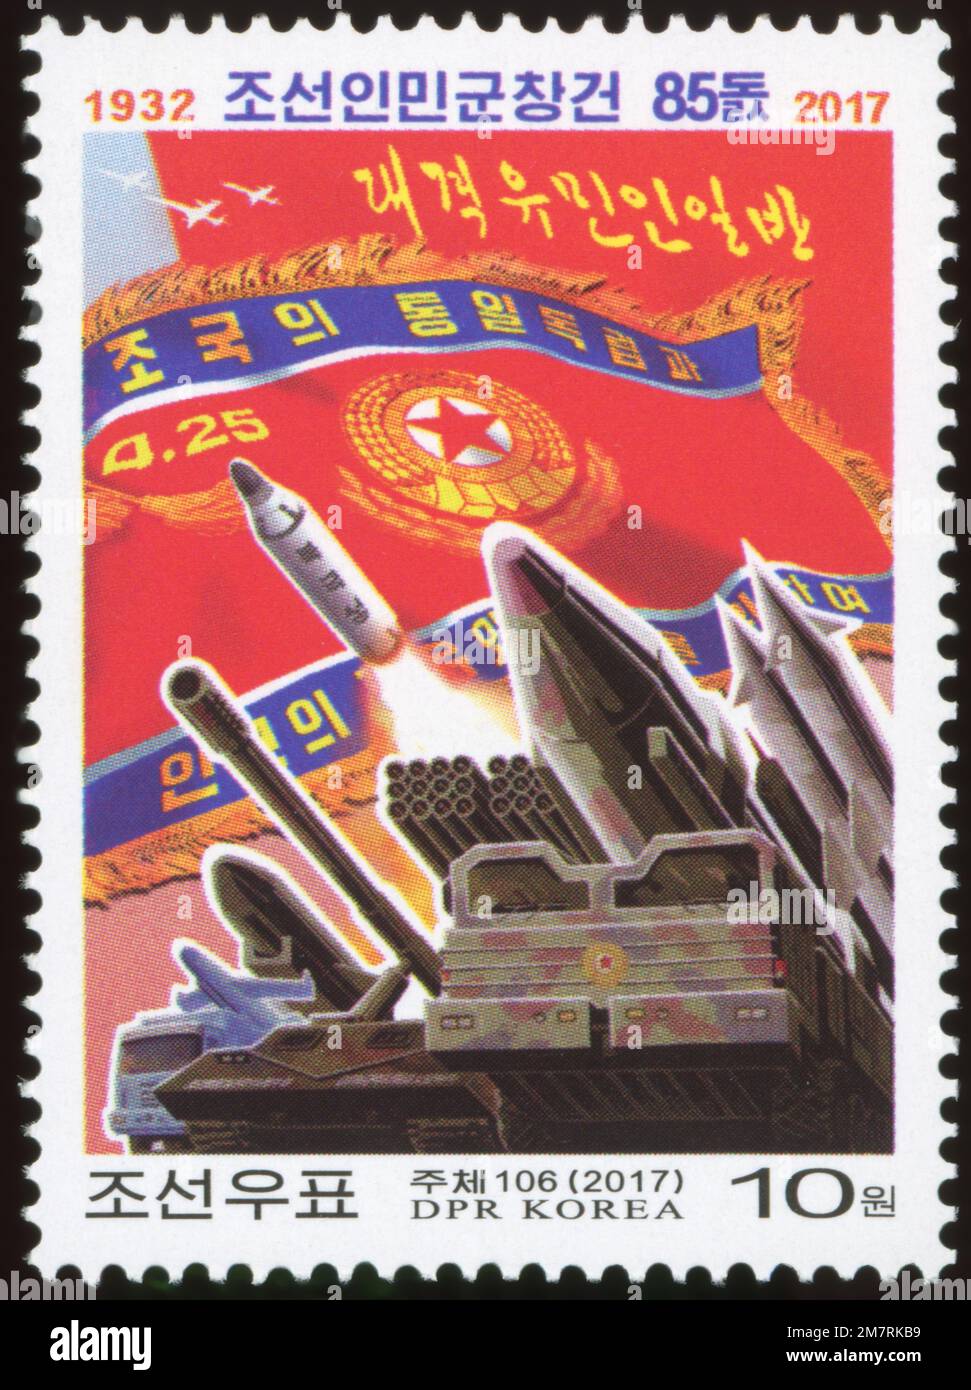 2017 North Korea stamp. The 85th Anniversary of the Korean People’s Army. Stock Photo